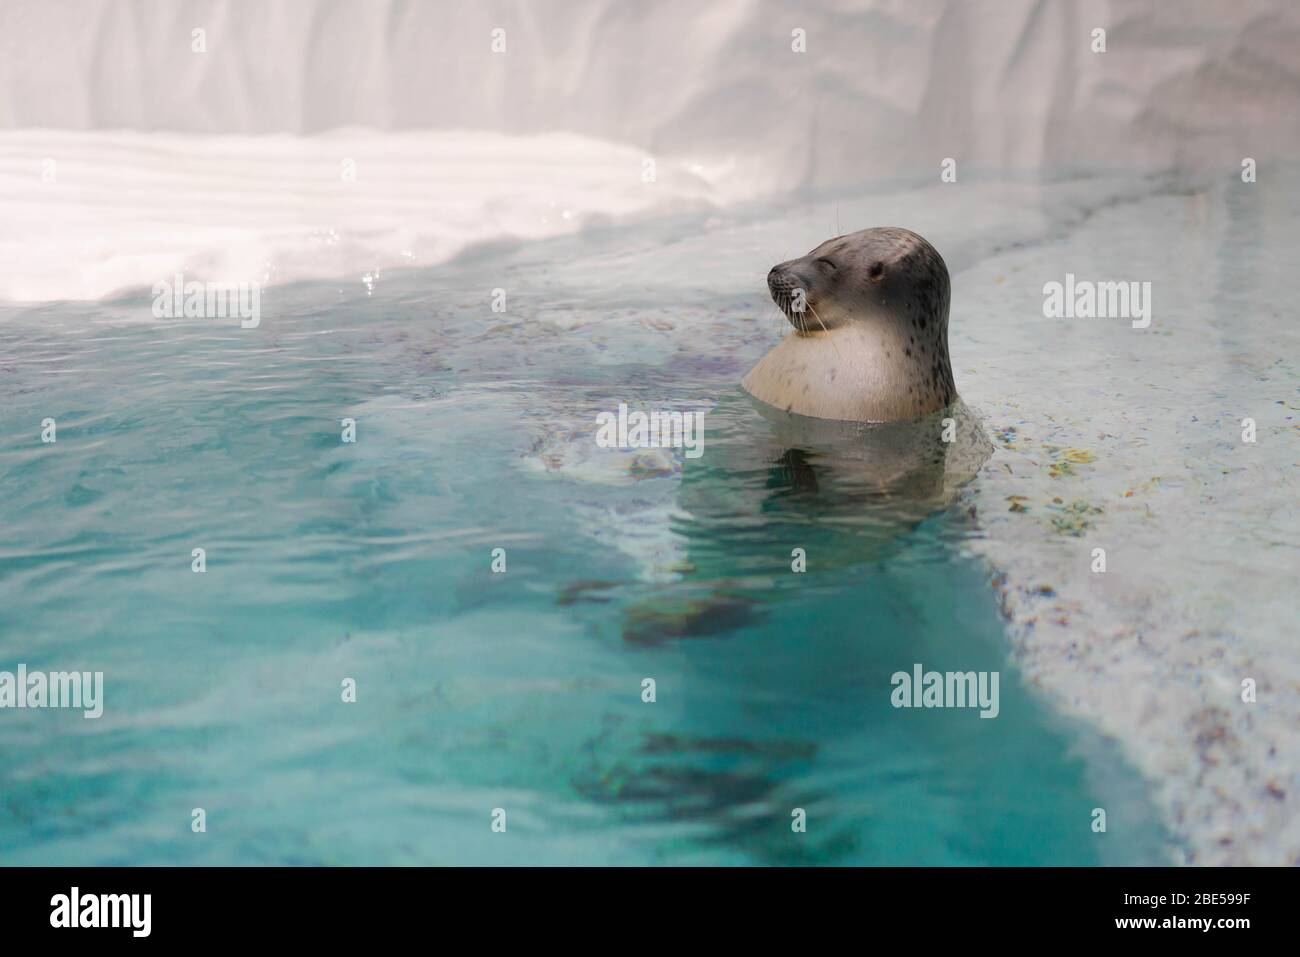 Adorable Largha seal bathing in clear water Stock Photo